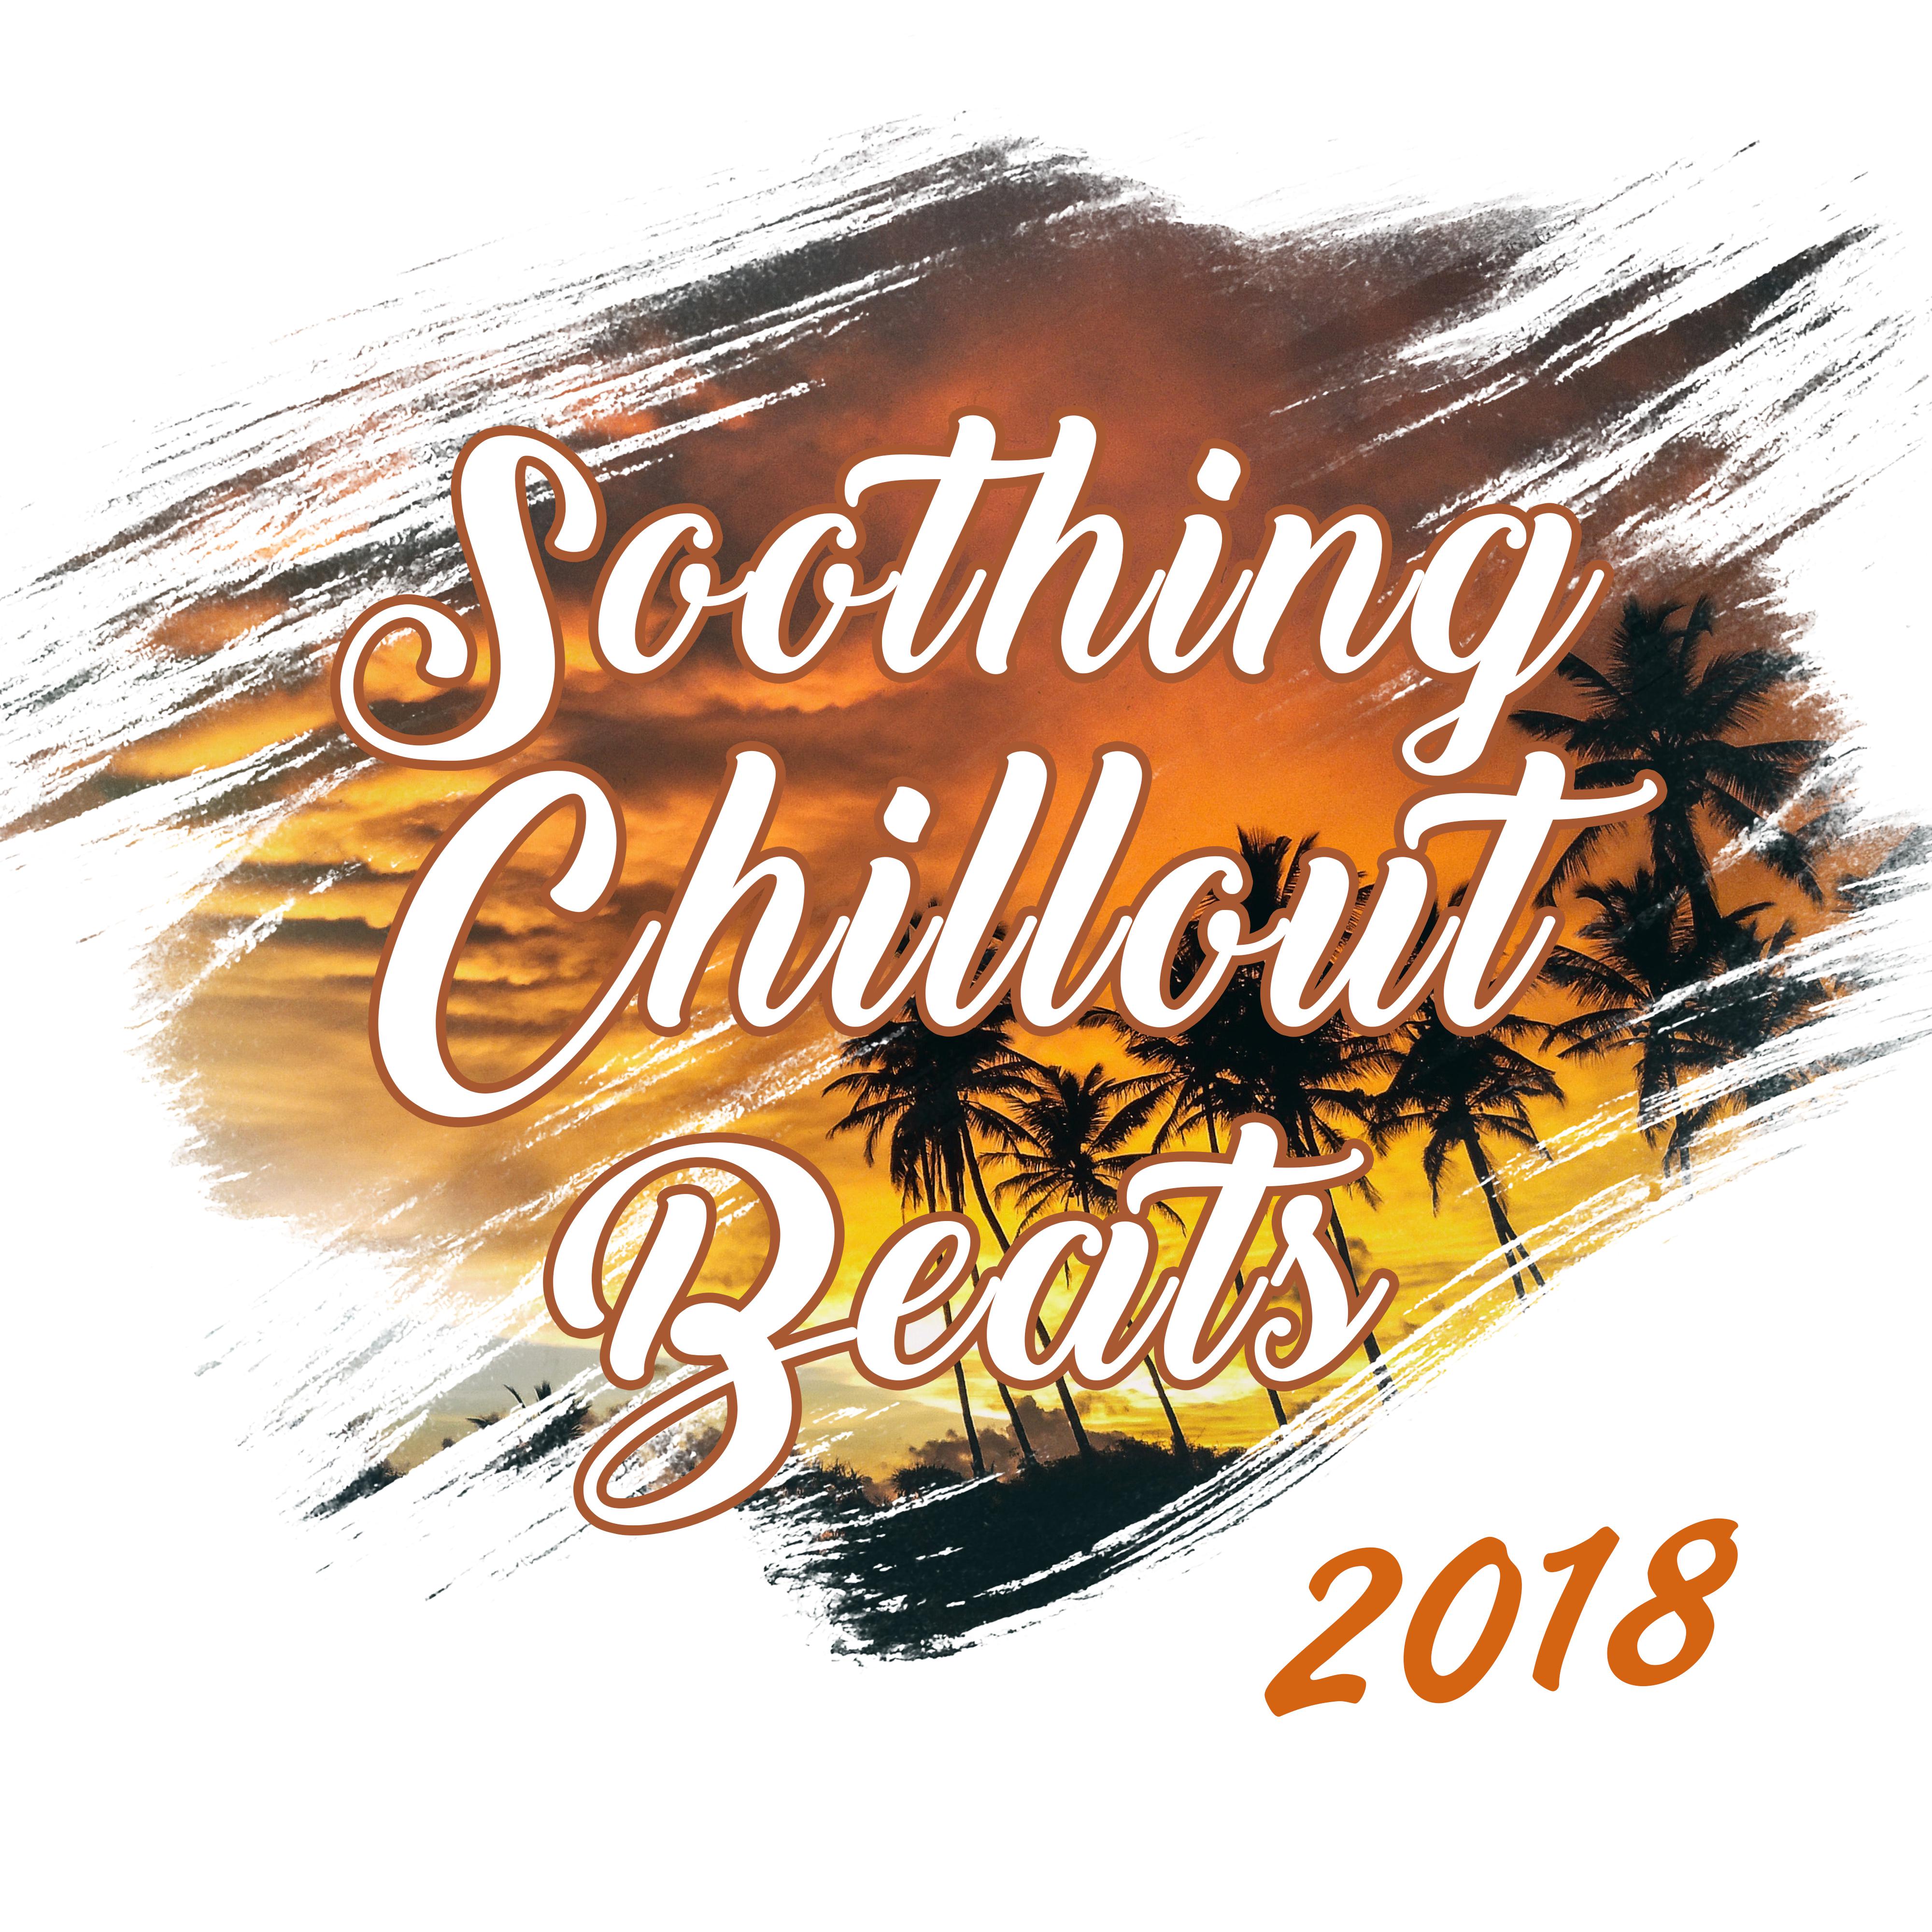 Soothing Chillout Beats 2018